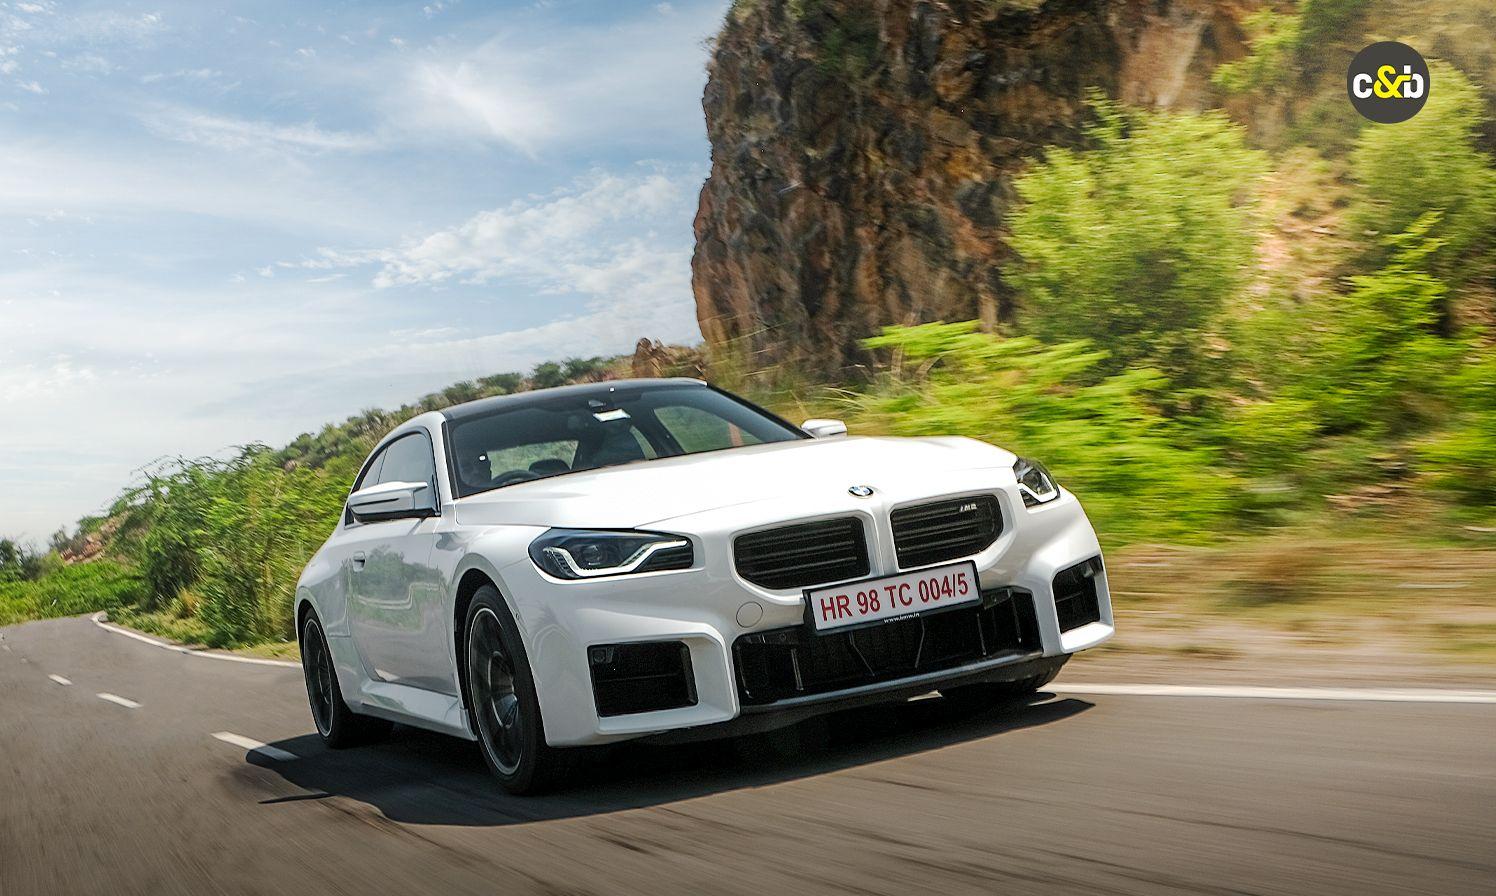 Barely a few months after its global debut the new generation of BMW M2 has made its way to India, and it is the first car from the brand with a manual gearbox in our market. We drive 